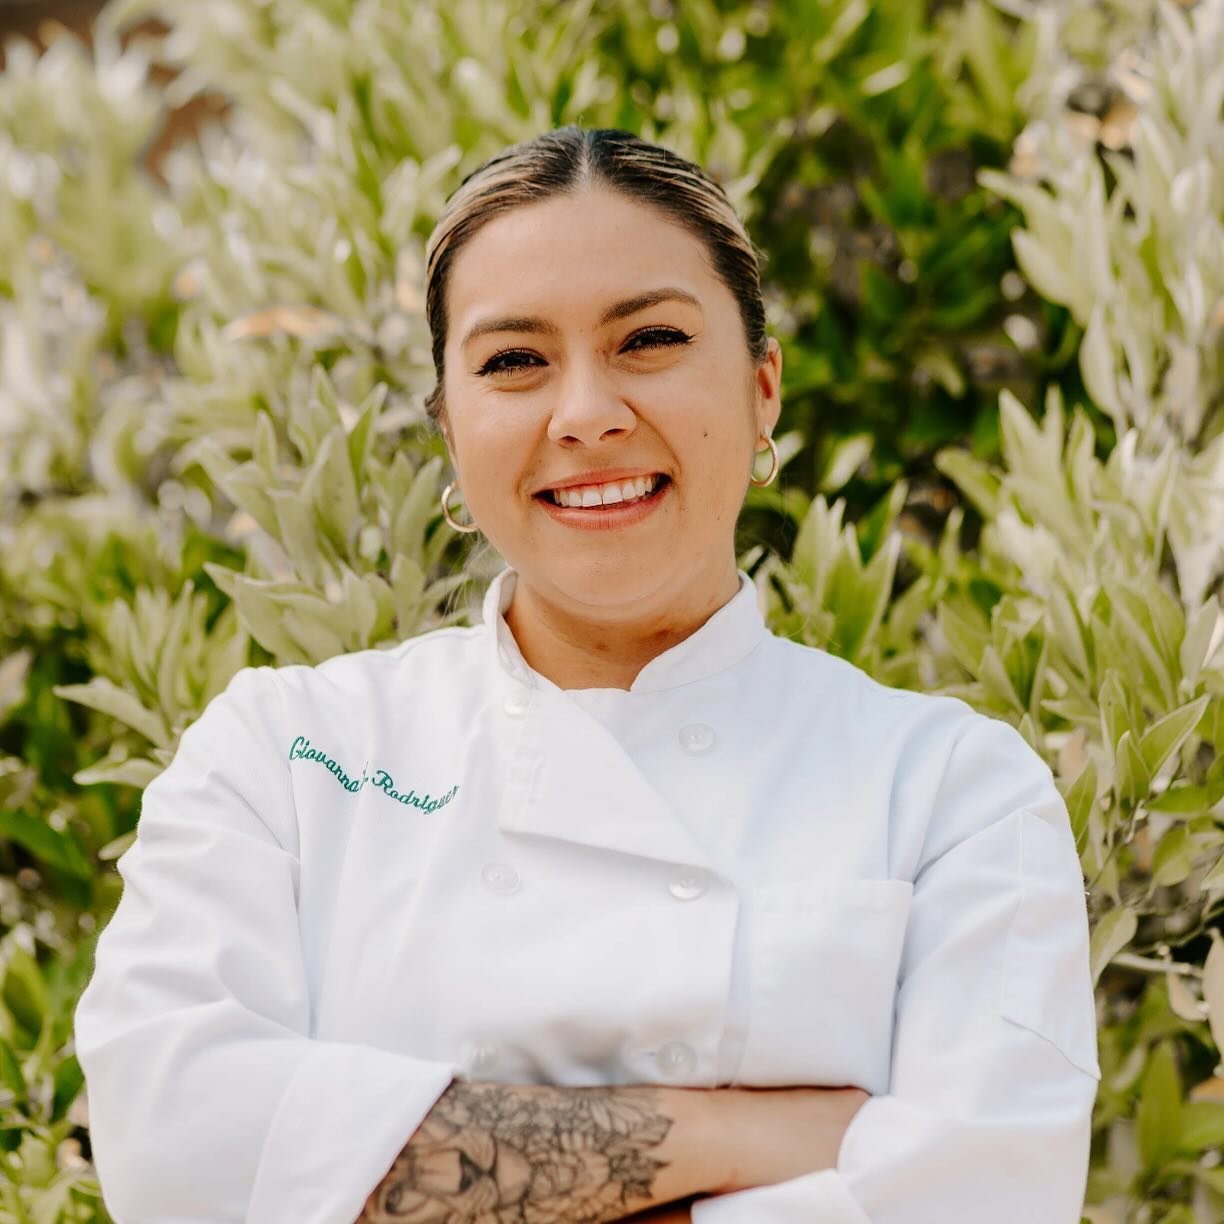 Meet Gigi, a Culinary Institute of America graduate and the creative genius behind Gigi&rsquo;s One Bite Wonder! Gigi&rsquo;s passion for the culinary arts began in her mom&rsquo;s tiny kitchen and blossomed into a full-fledged career. After years of